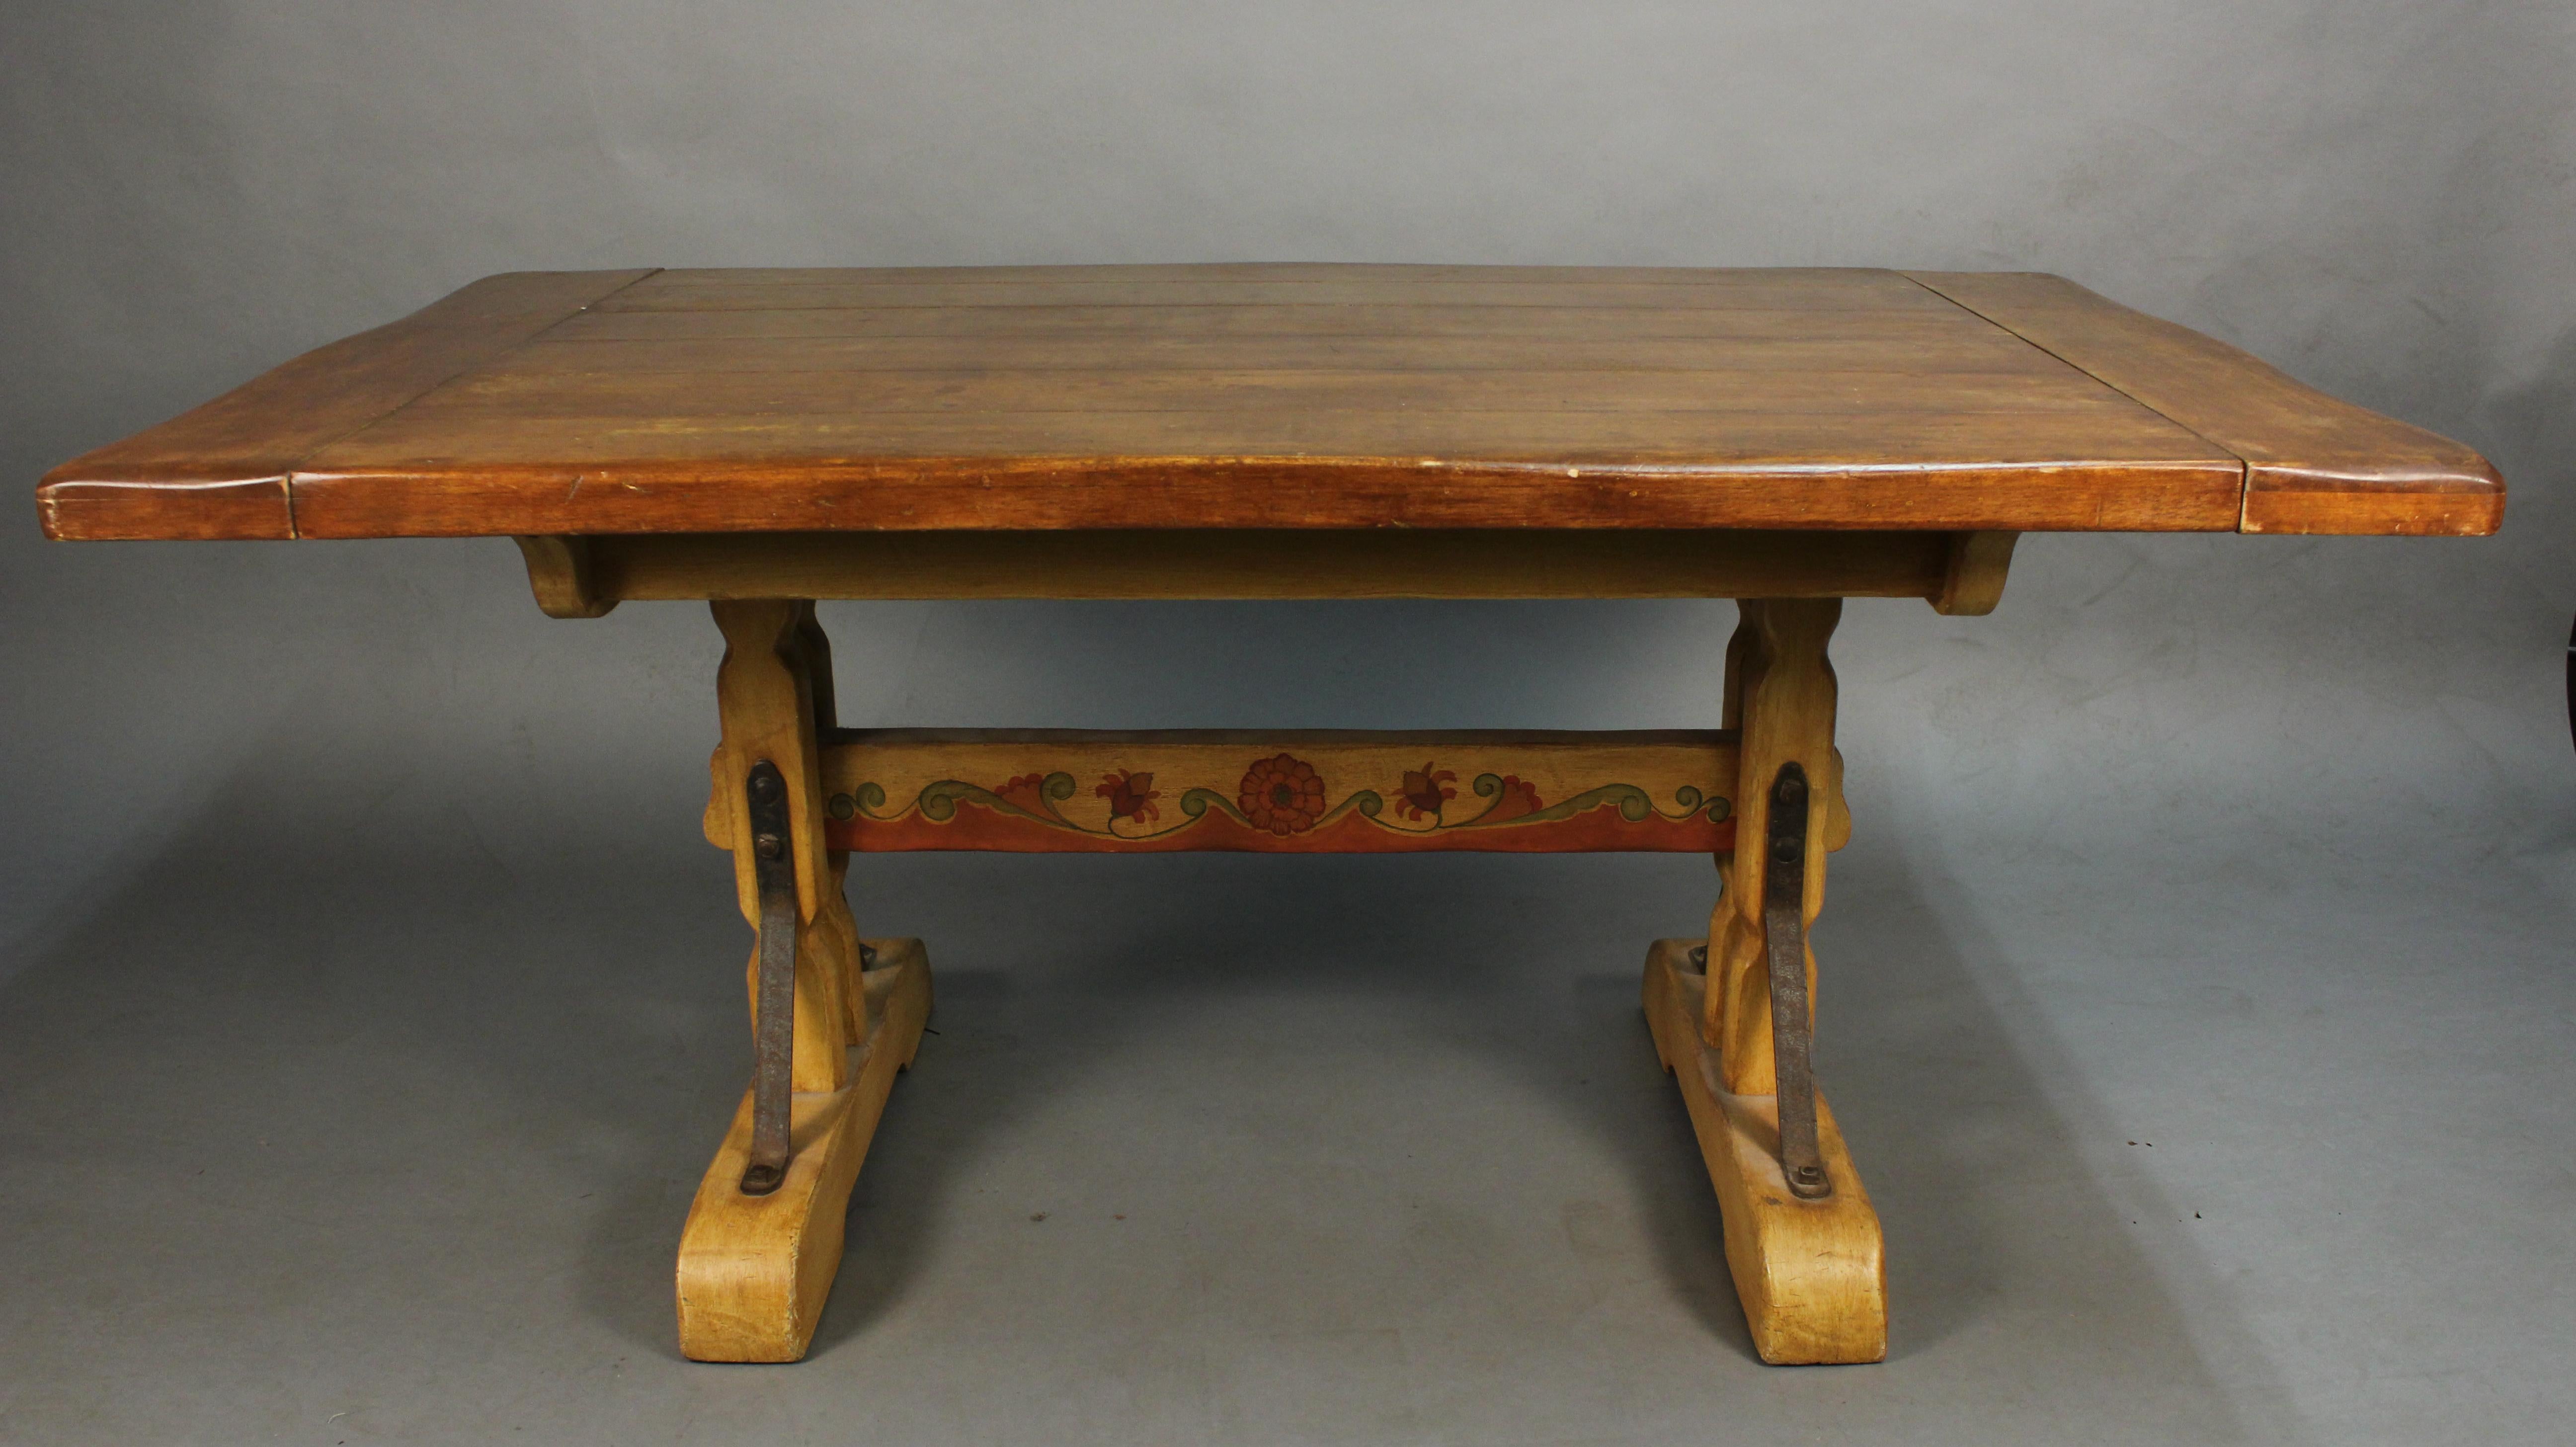 Attractive 1930s signed Monterey table with original flower painting stretcher and iron stretcher. With 4 leafs the table can go up to 95